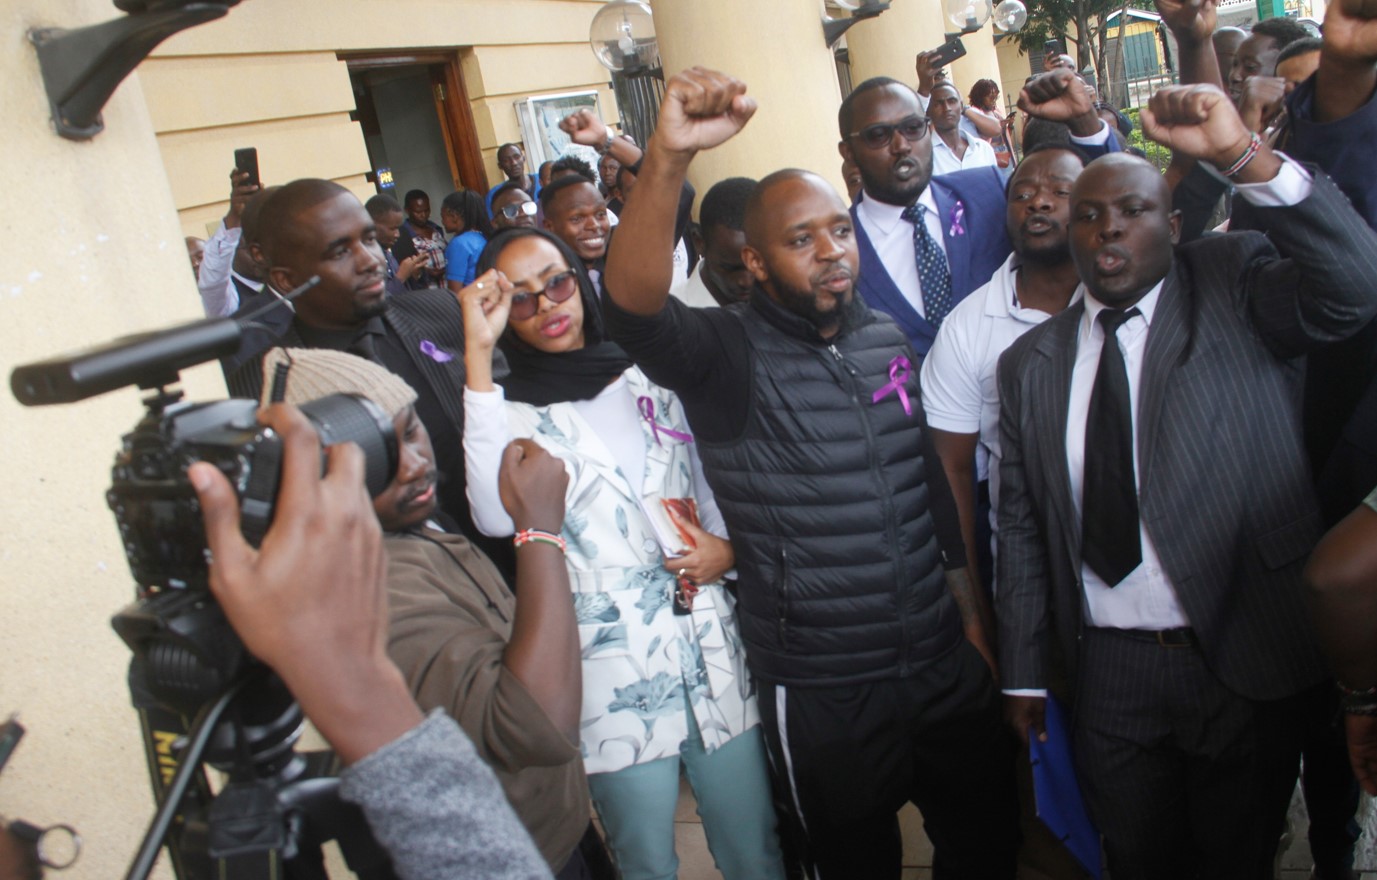 Boniface Mwangi: Who stands to benefit from violence during anti-tax protests?